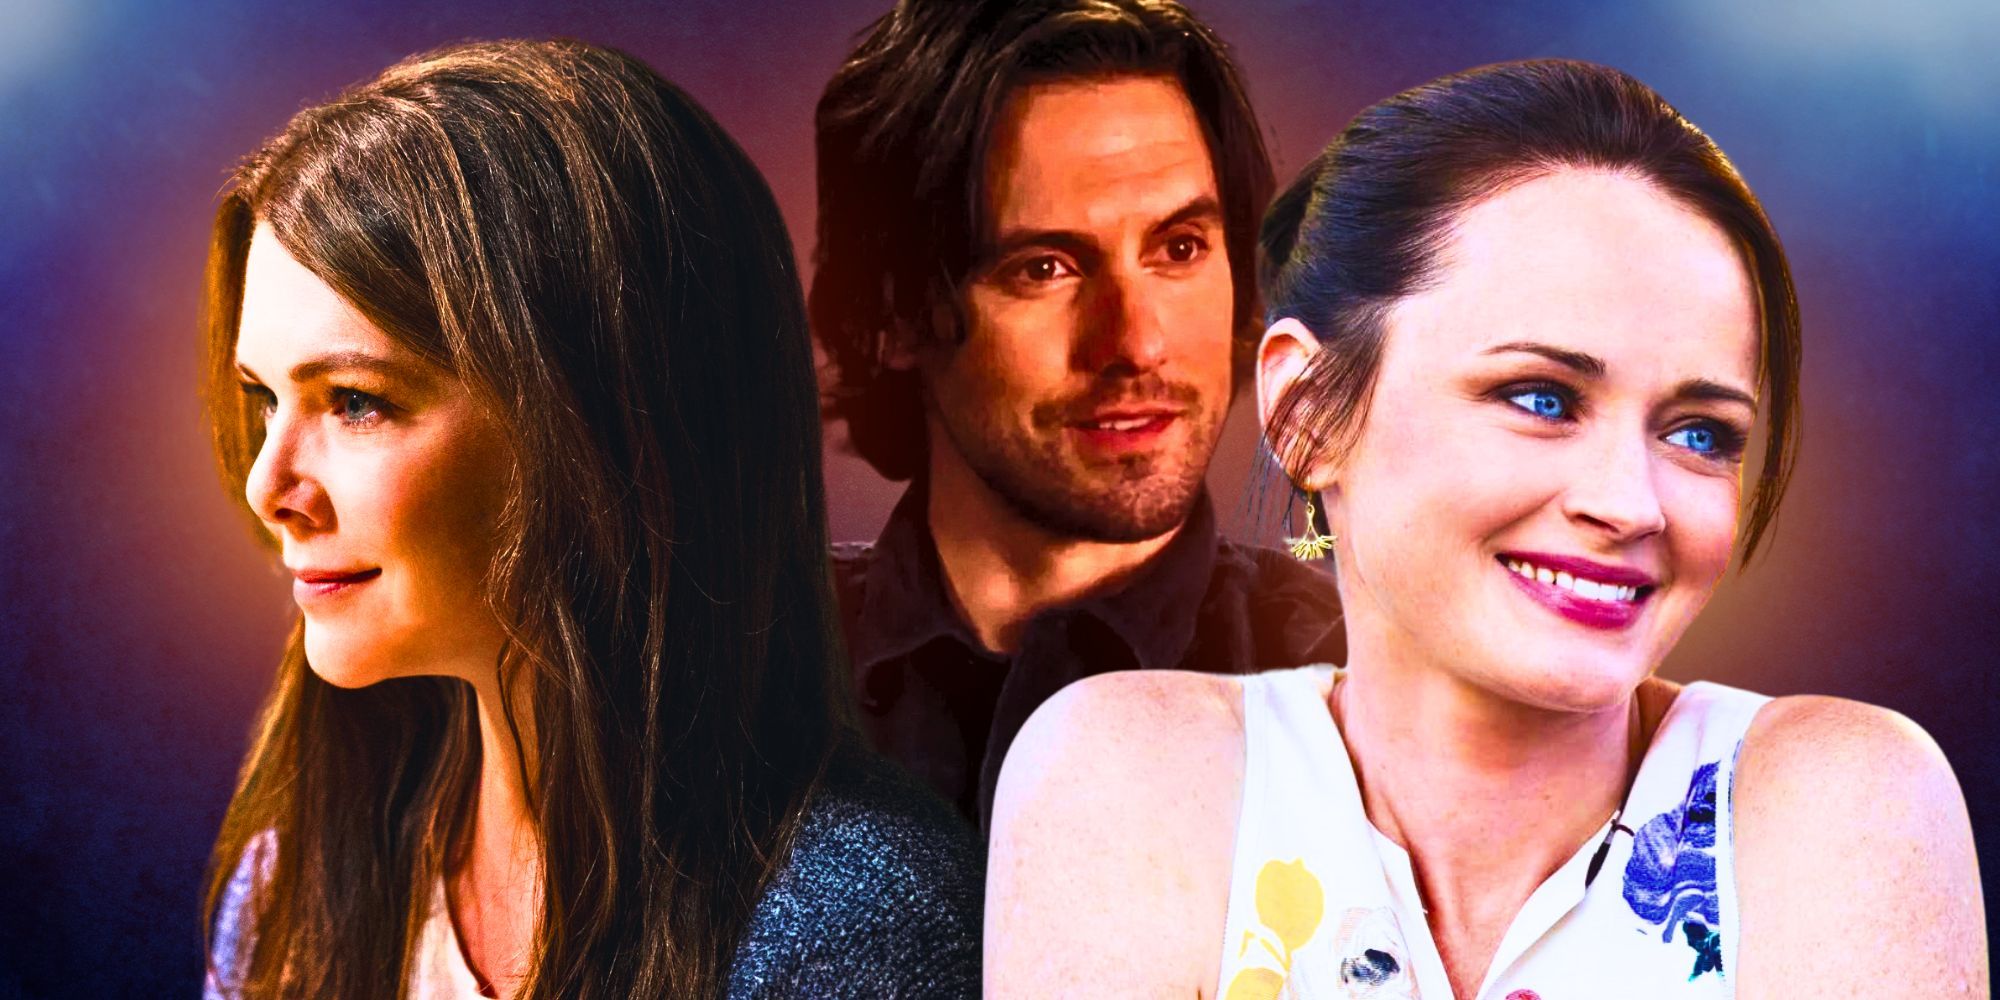 This collage shows Lorelai, Jess, and Rory from Gilmore Girls: A Year in the Life.